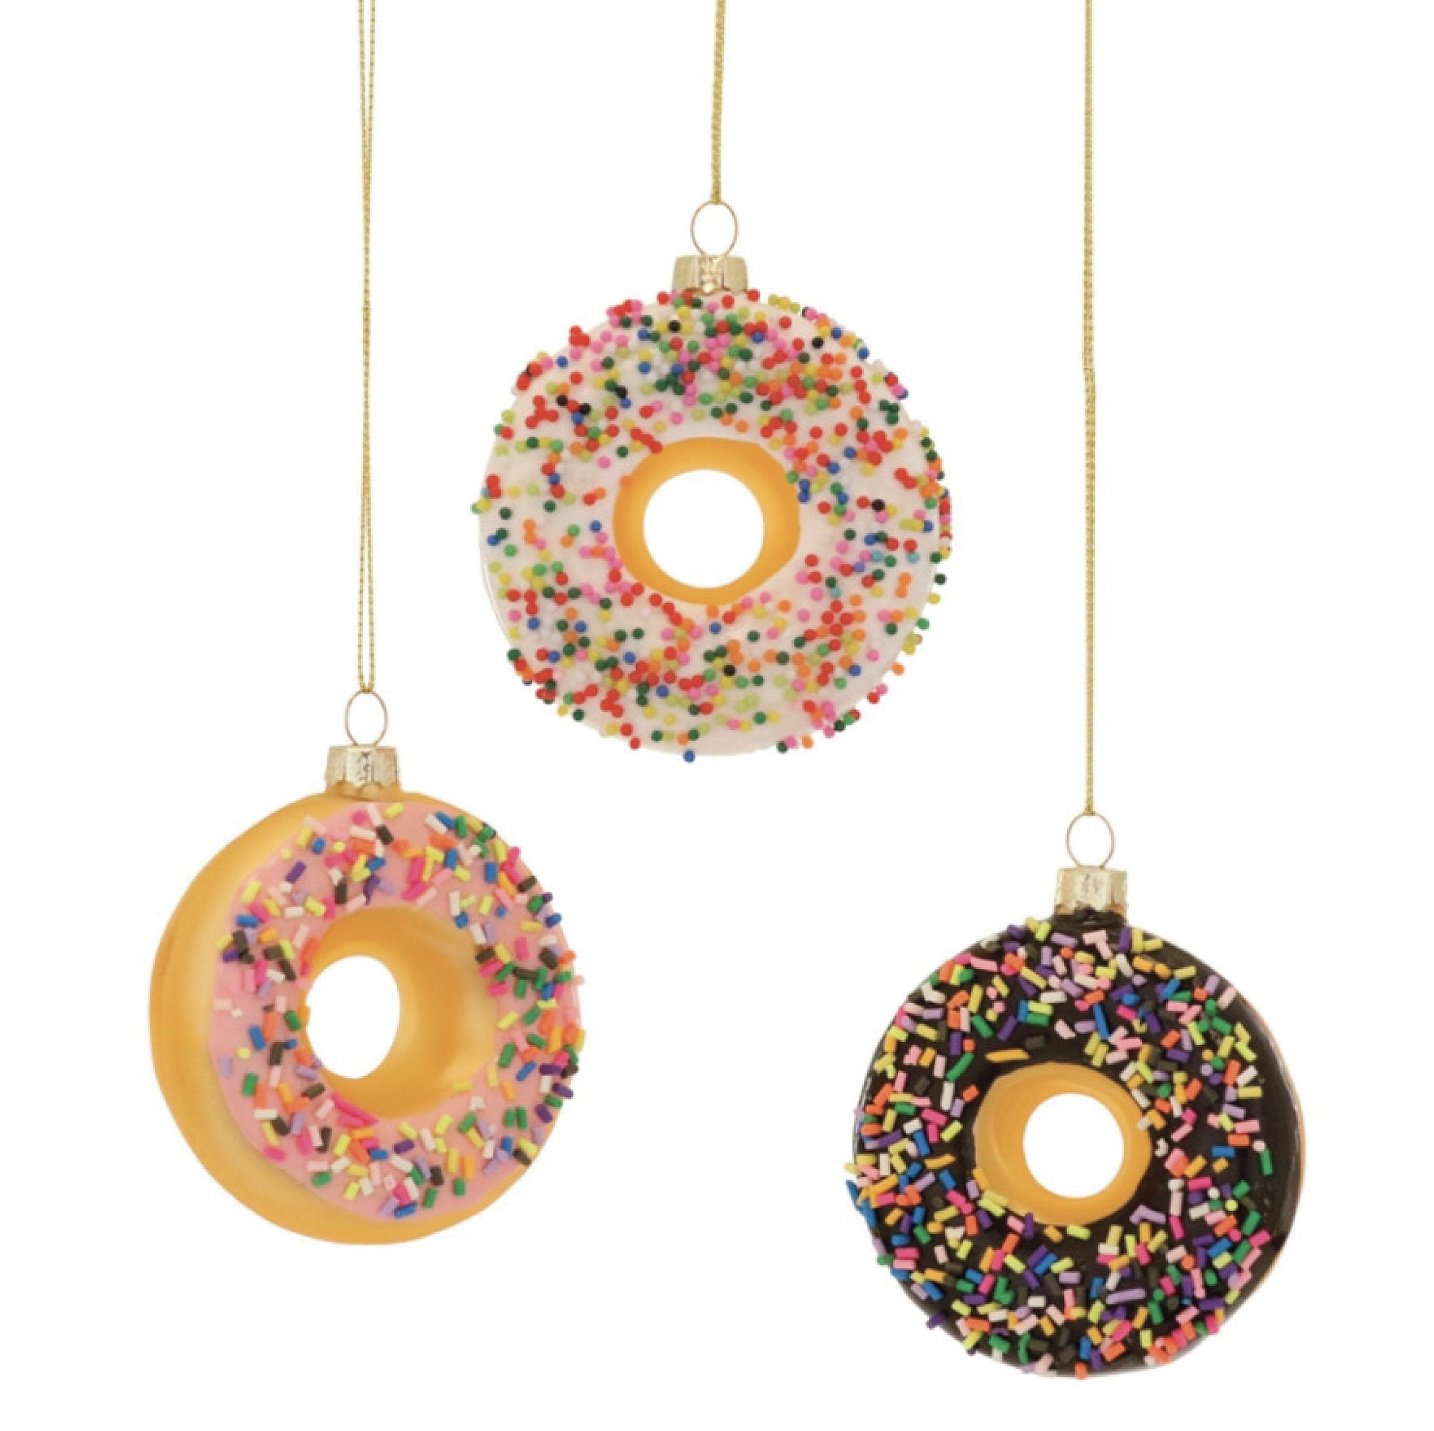 Cody Foster Co. Donuts With Sprinkles Ornaments